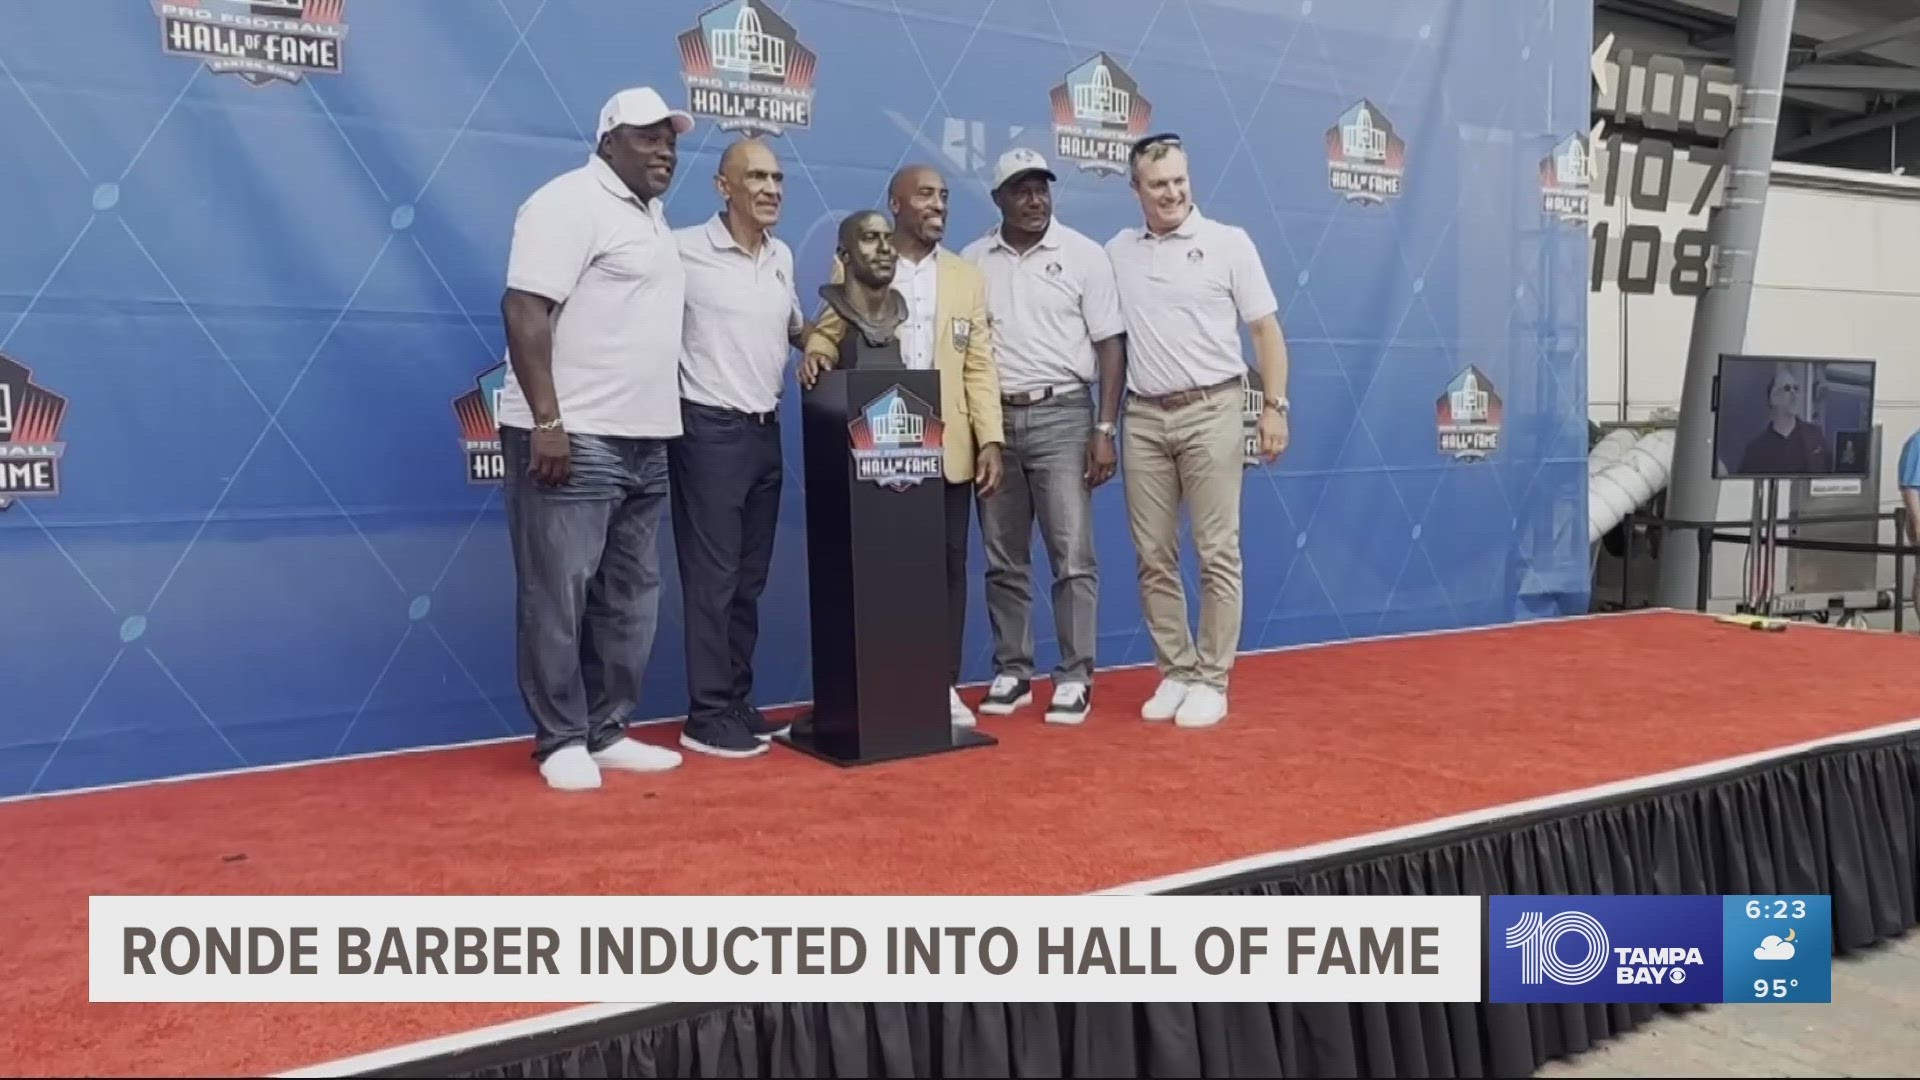 Buccaneers legend Ronde Barber is officially a member of the Pro Football Hall of Fame